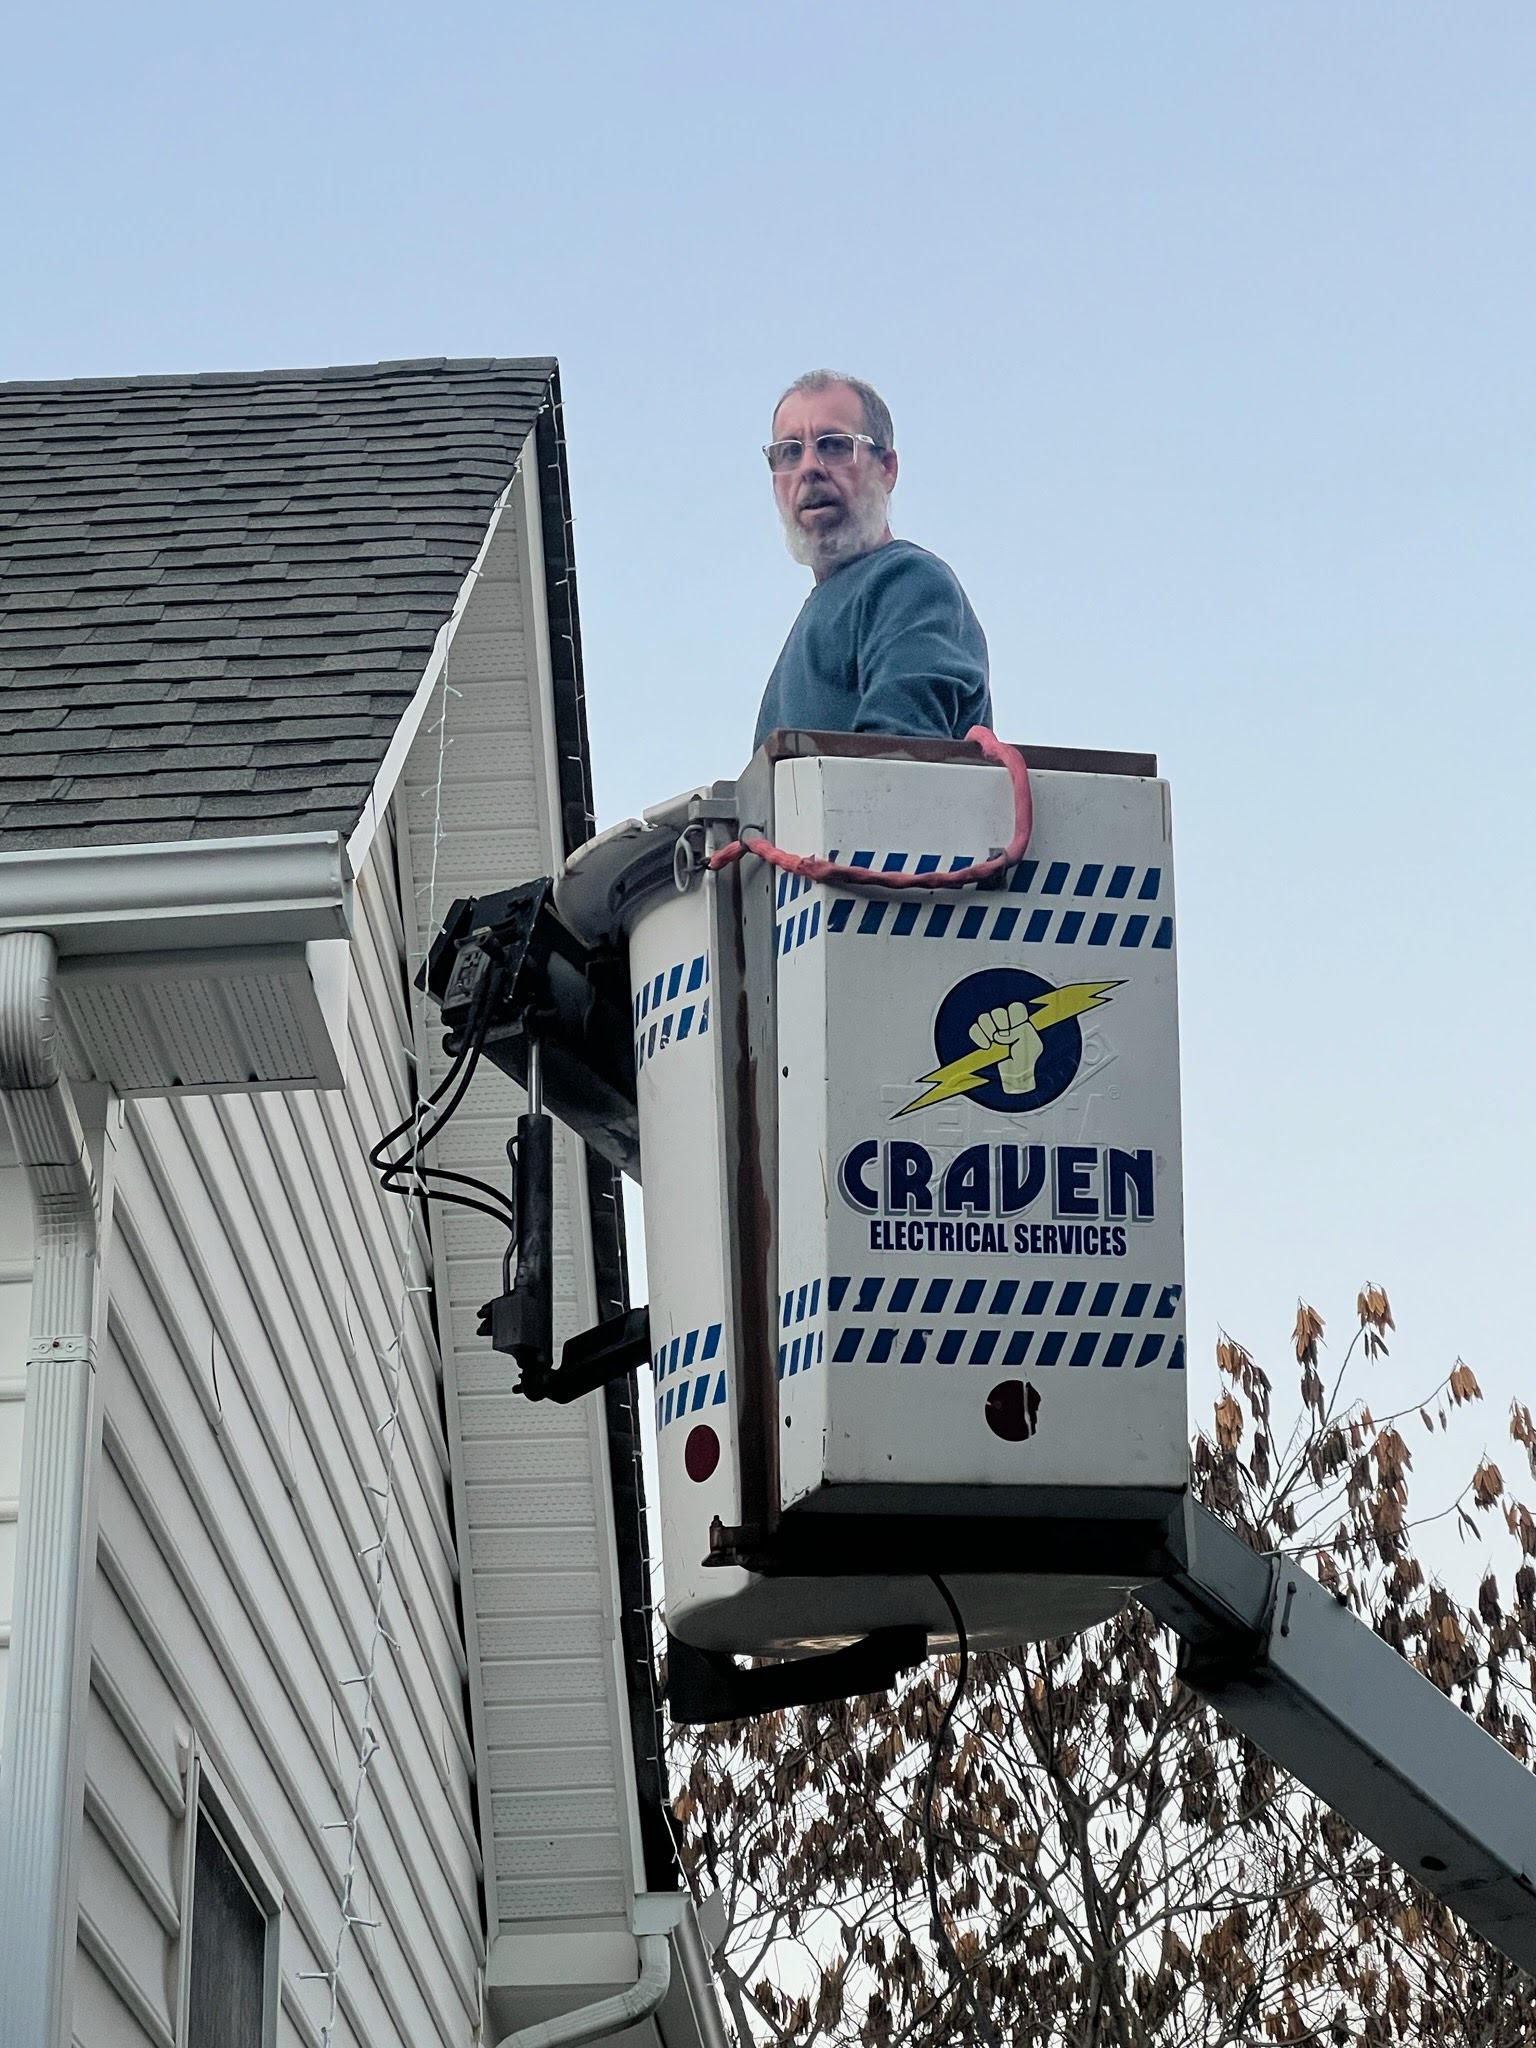 electrical technician in a craven bucket truck installing lights on a home in Virginia.